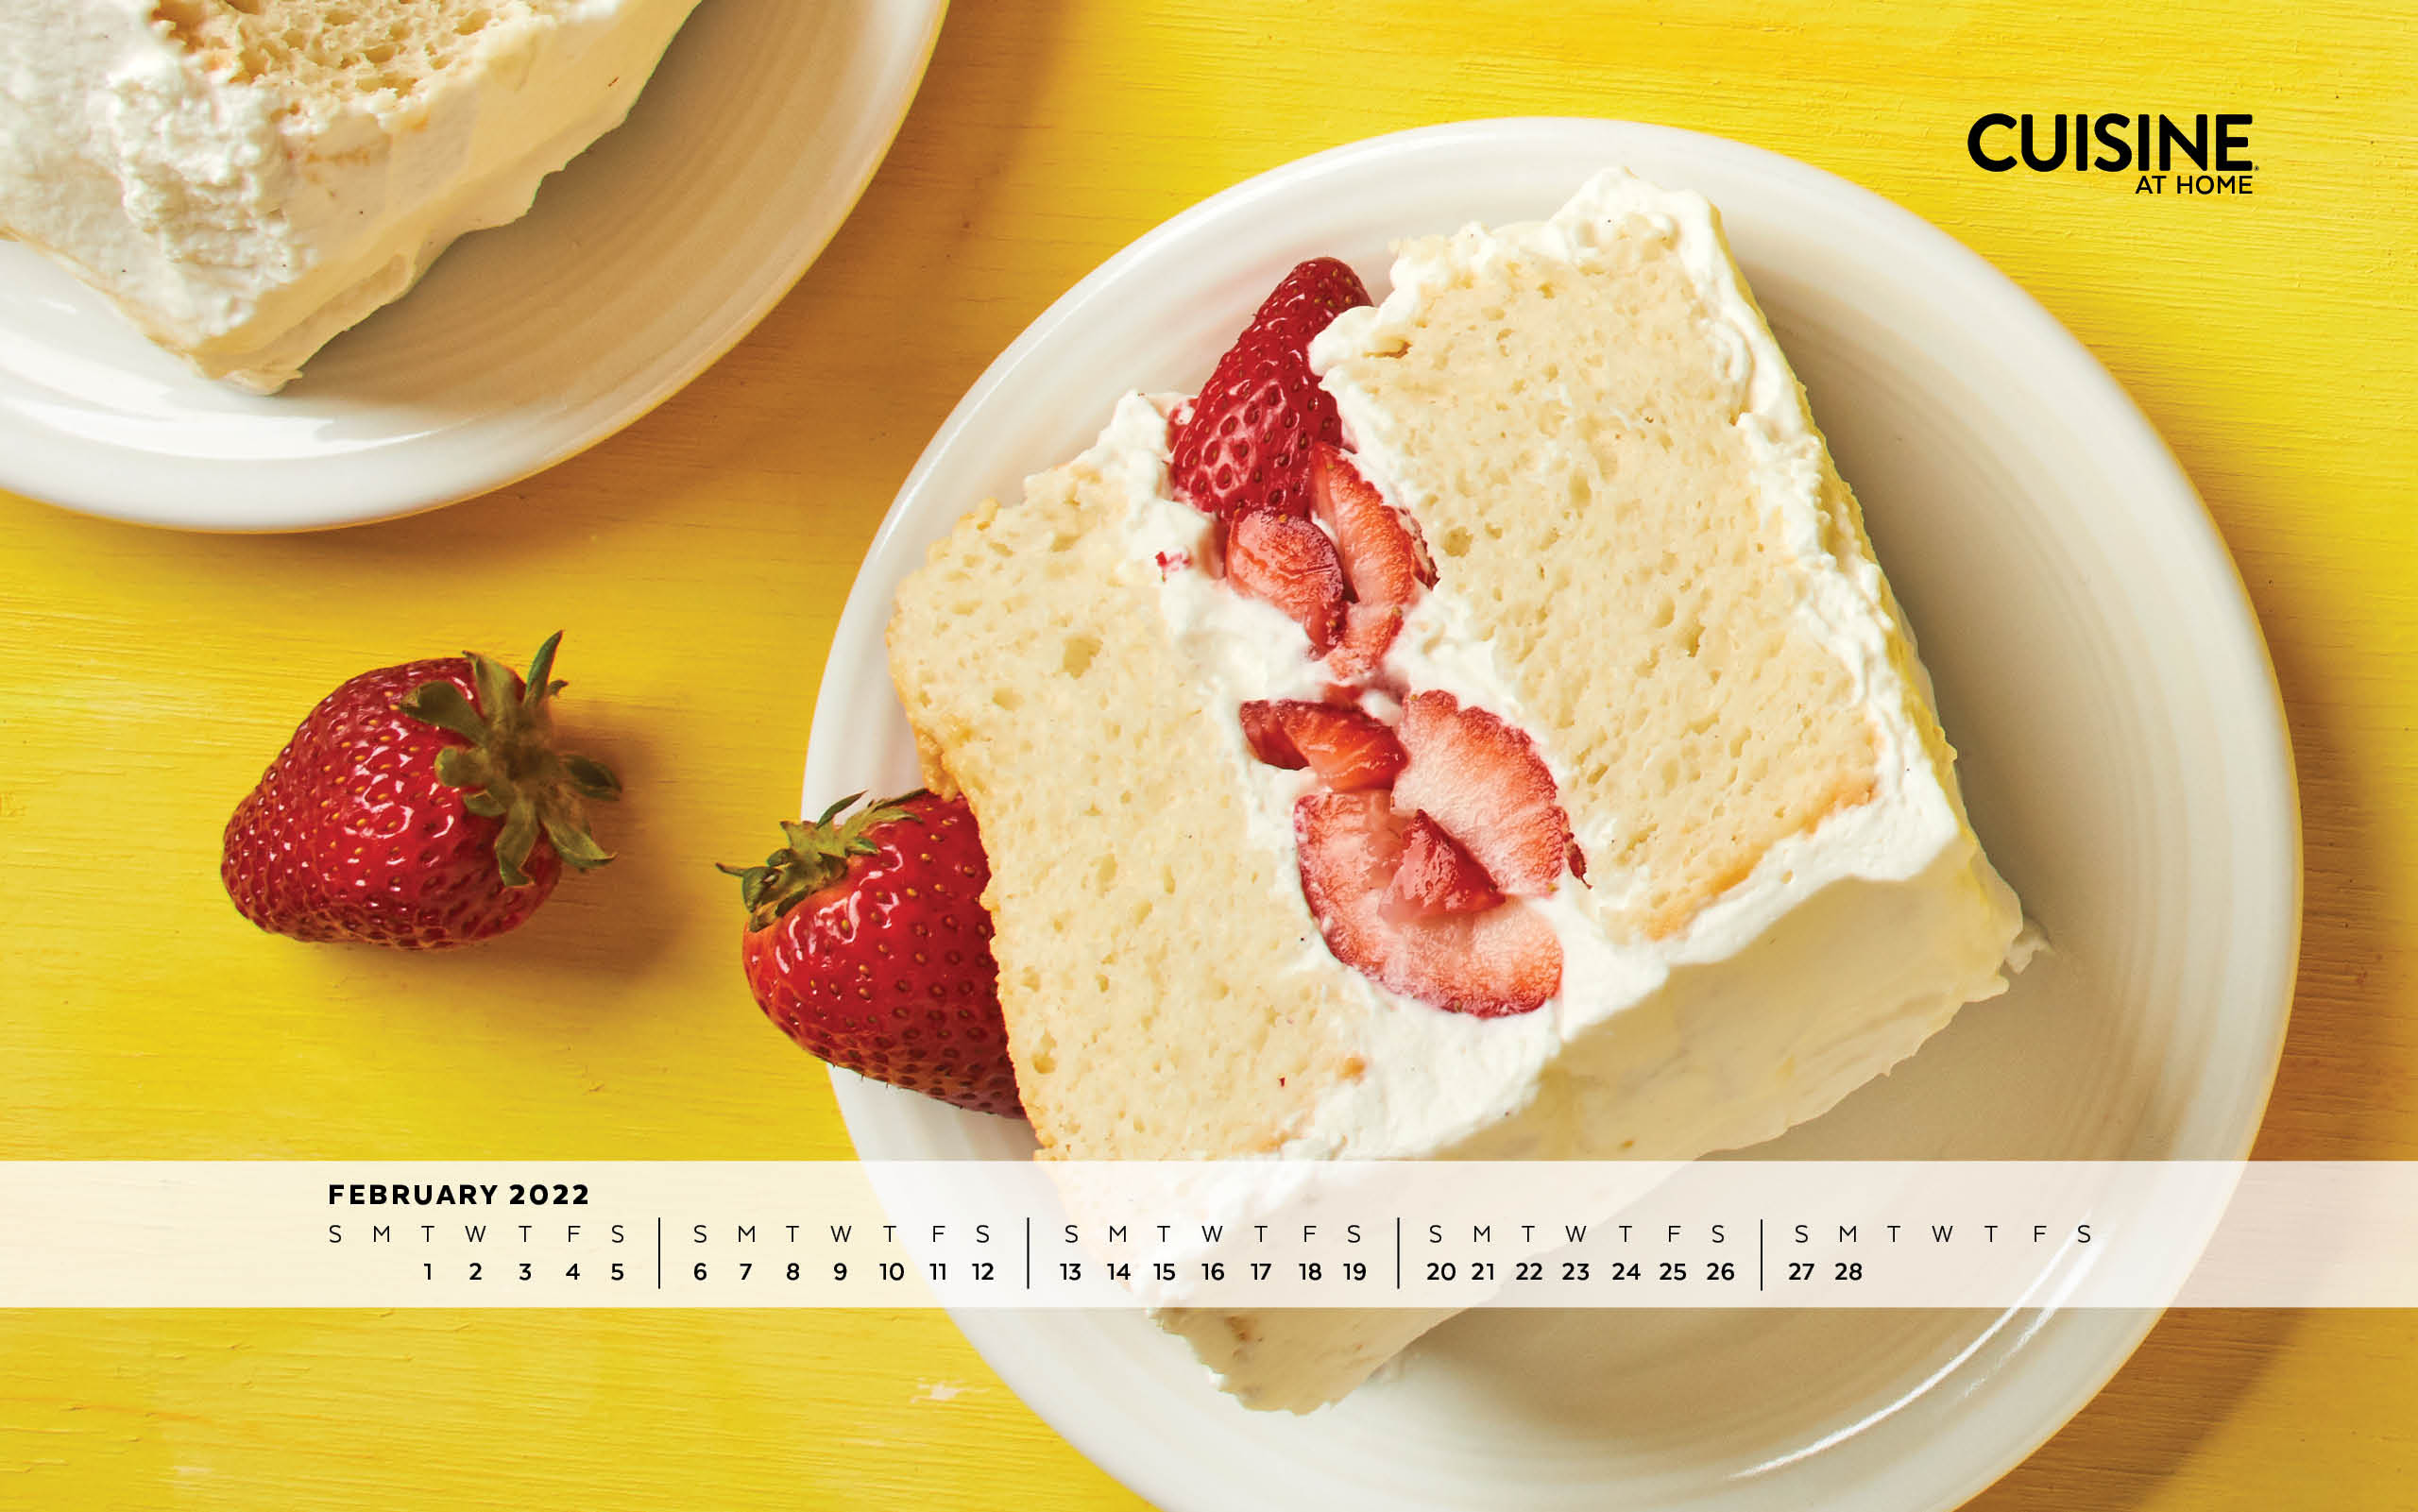 Free Desktop Wallpaper with calendar Windows Mac - February 2022 - Cuisine at Home - Winter Valentine's Day aesthetic food cooking baking dessert strawberry shortcake cheerful yellow